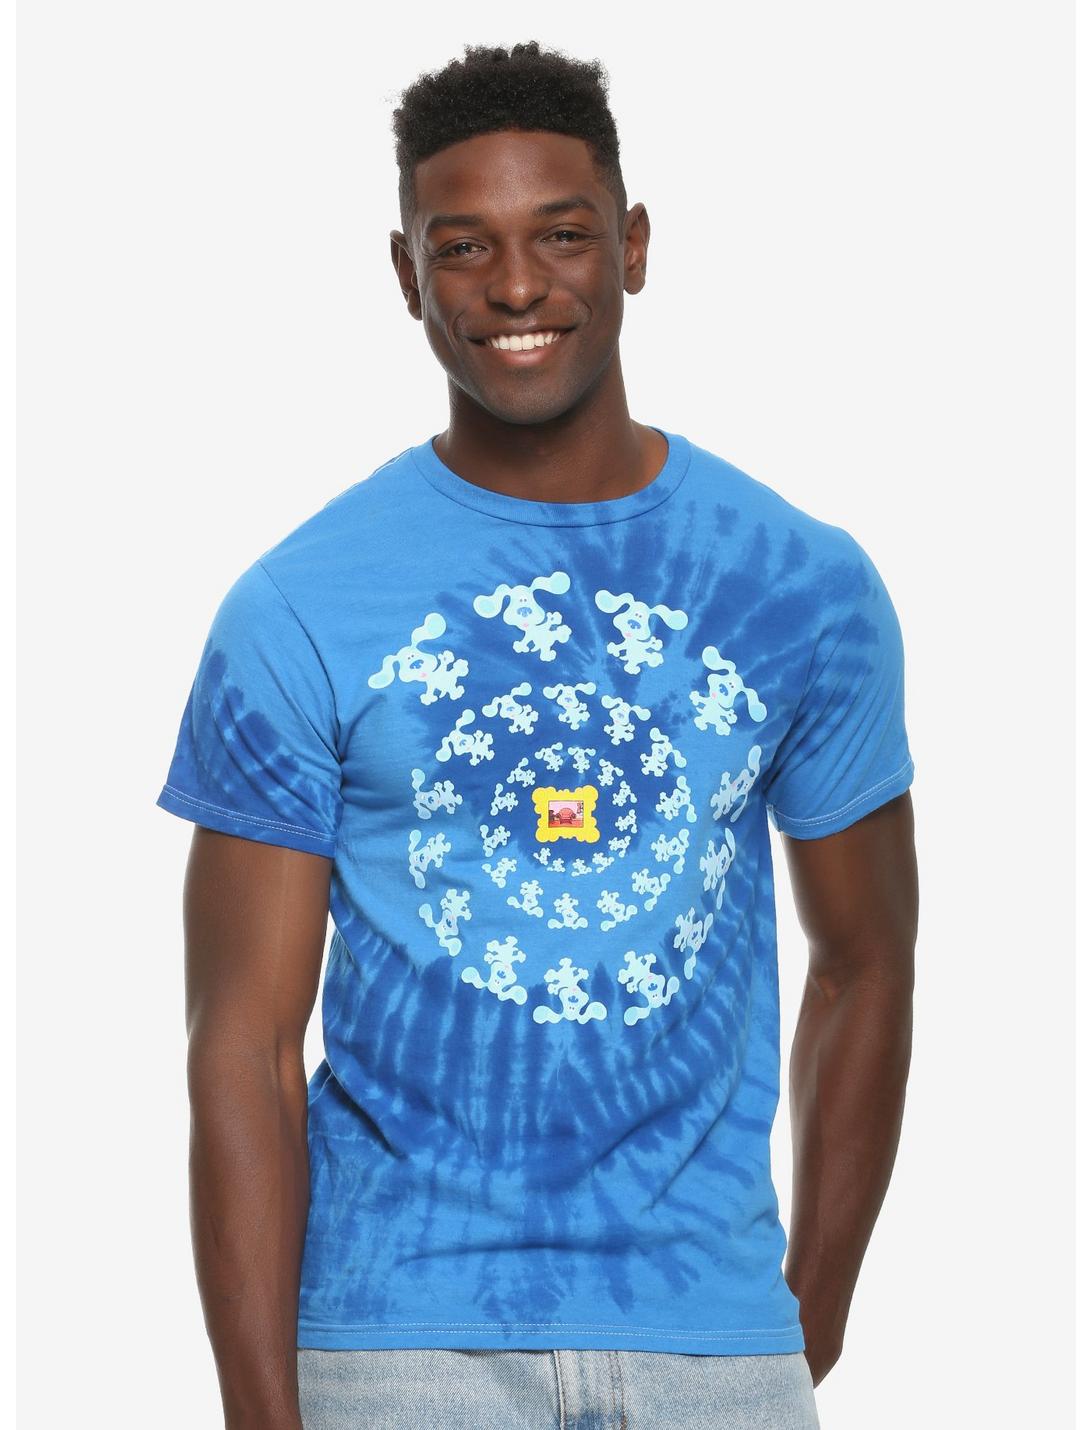 Blue's Clues Skidoo Tie-Dye T-Shirt - BoxLunch Exclusive, BLUE, hi-res